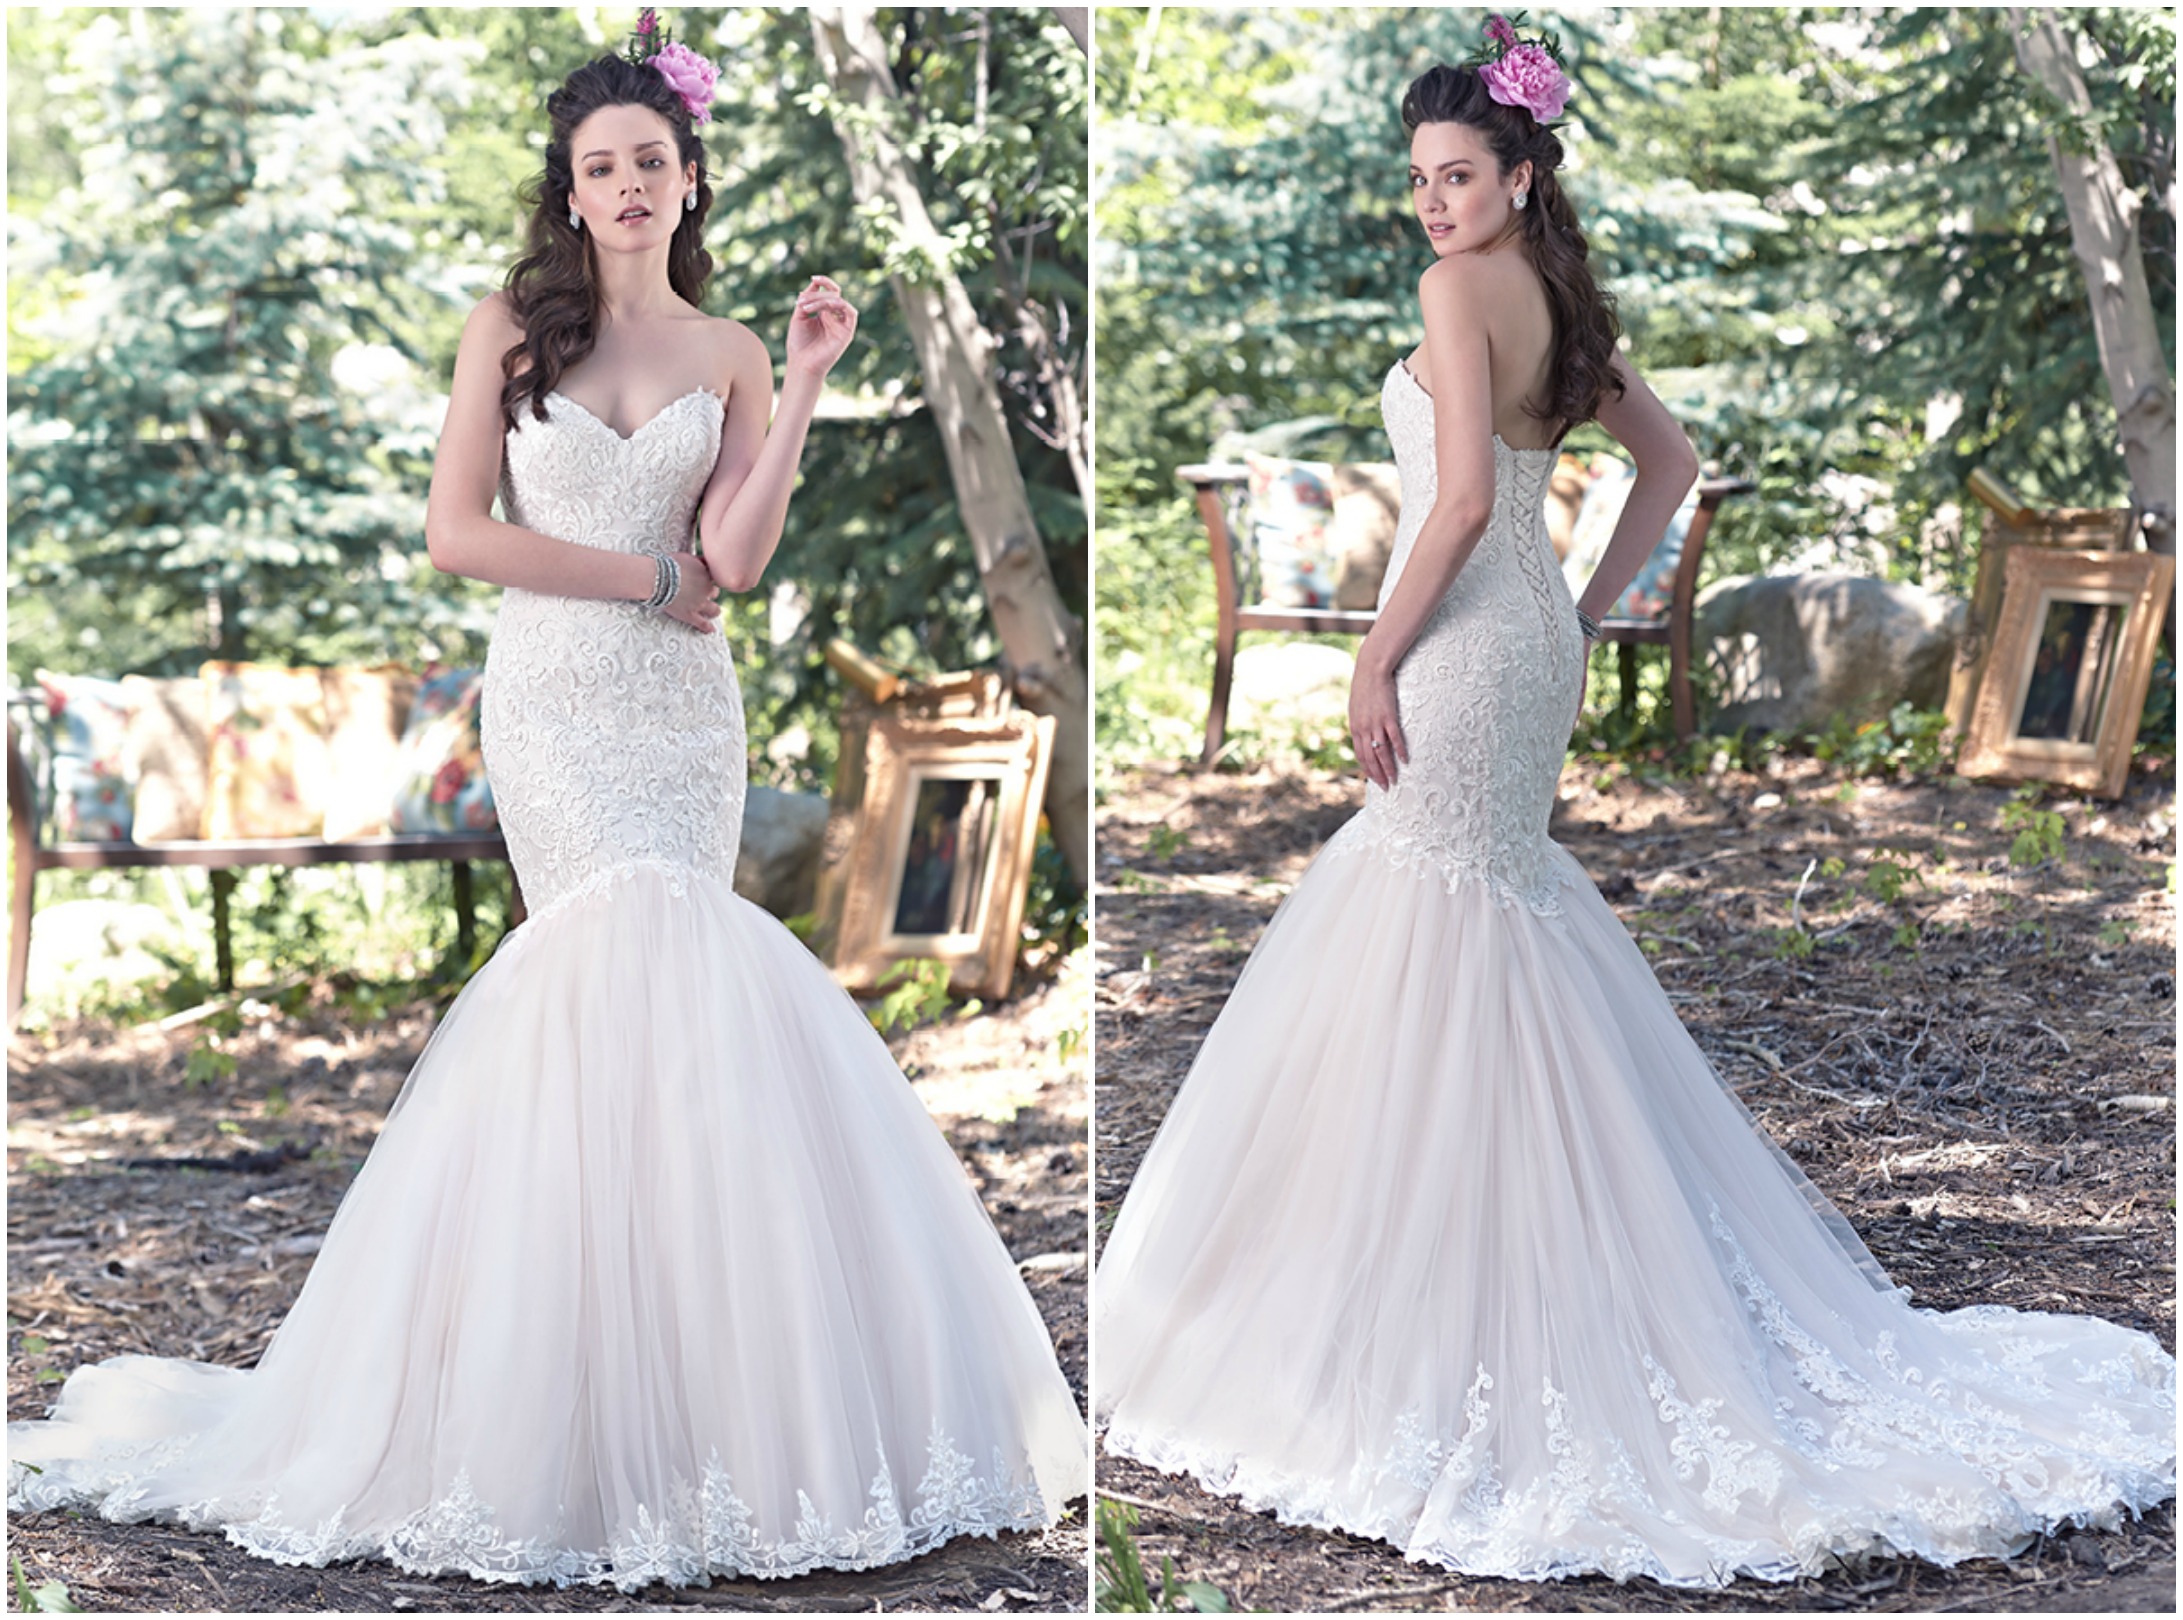 <a href="http://www.maggiesottero.com/maggie-sottero/lansing/9549" target="_blank">Maggie Sottero Spring 2016</a>